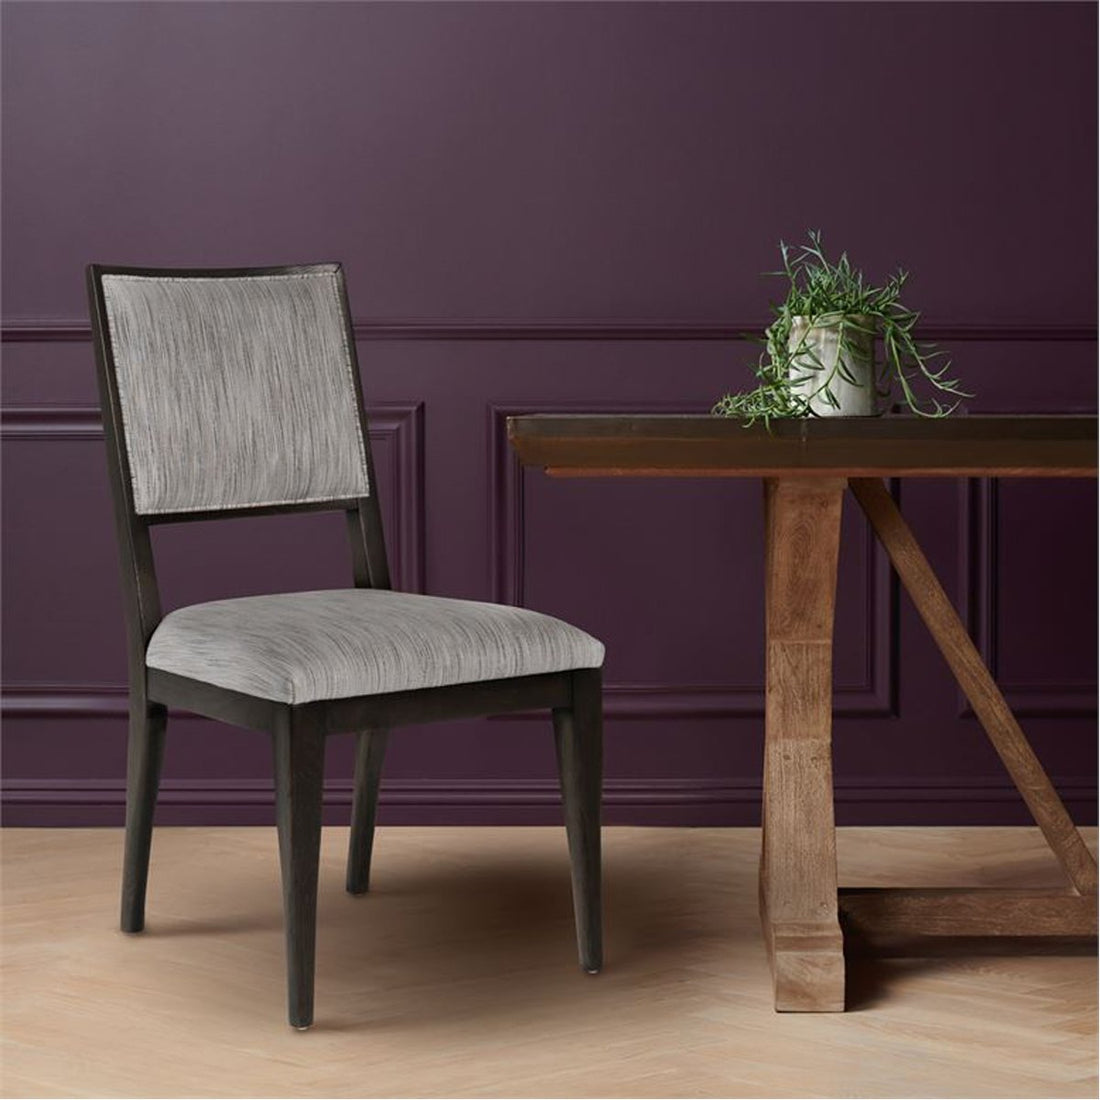 Made Goods Nelton Upholstered Dining Chair in Nile Fabric